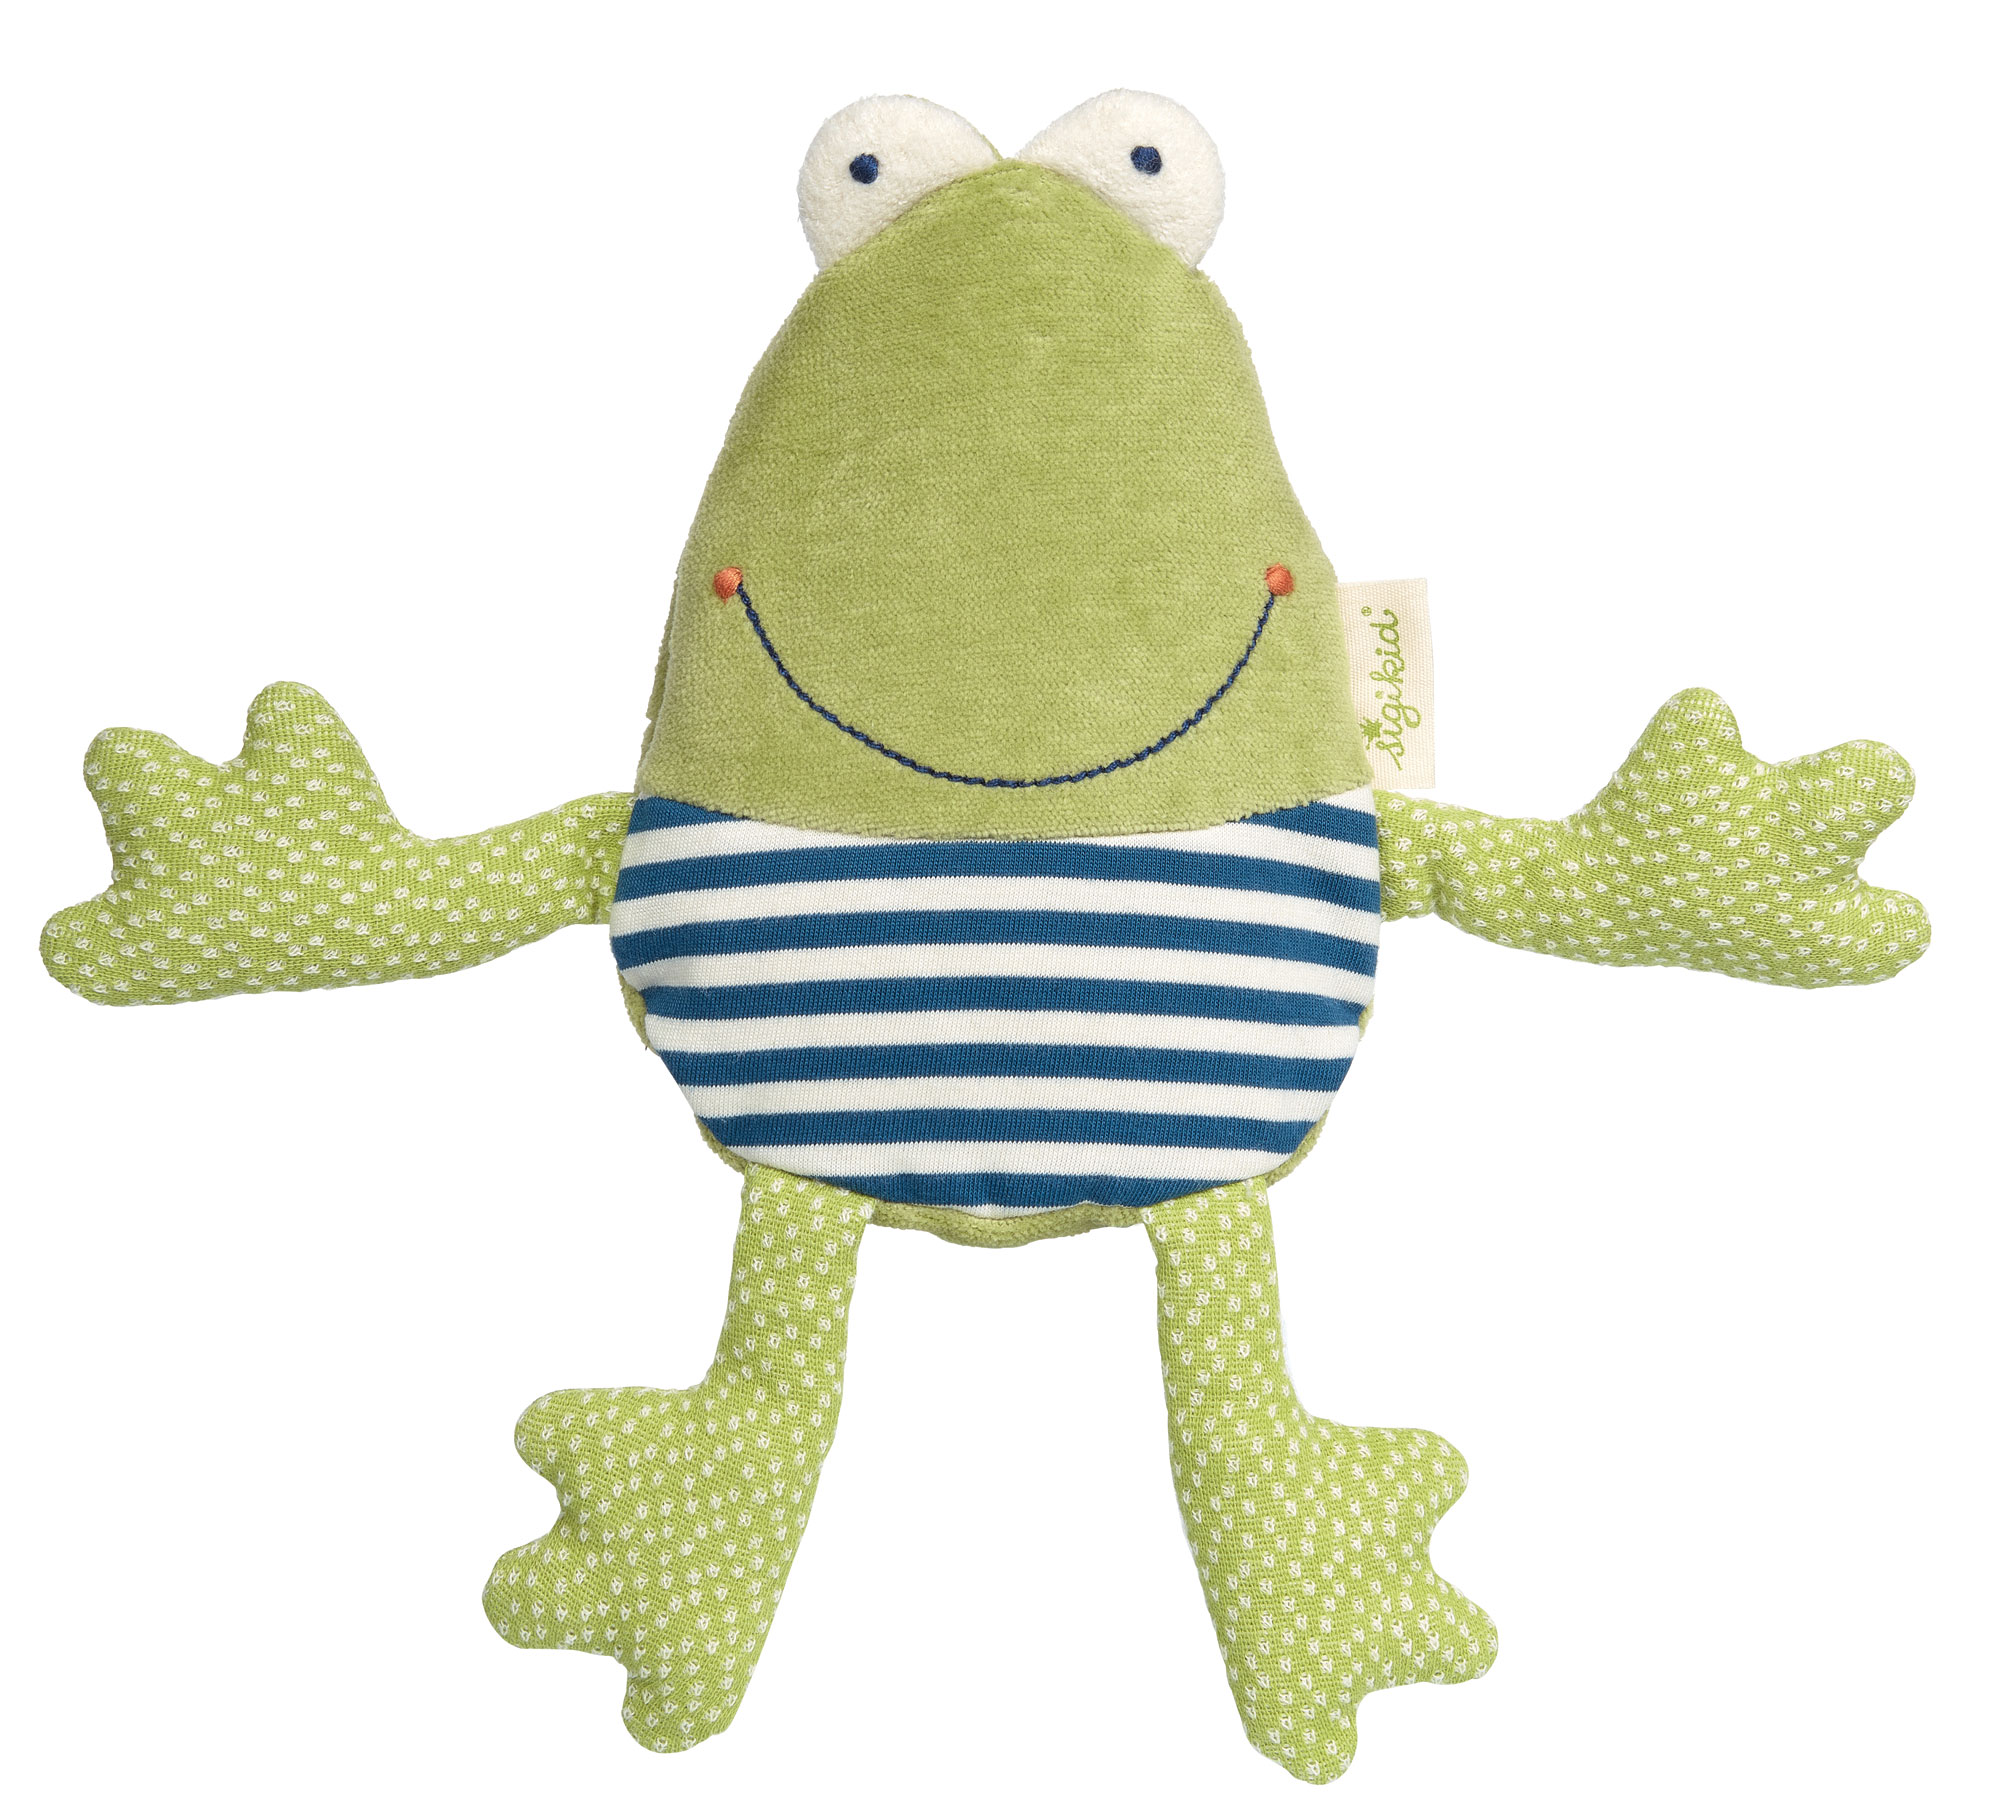 Organic baby soft toy frog with cherry stone filling